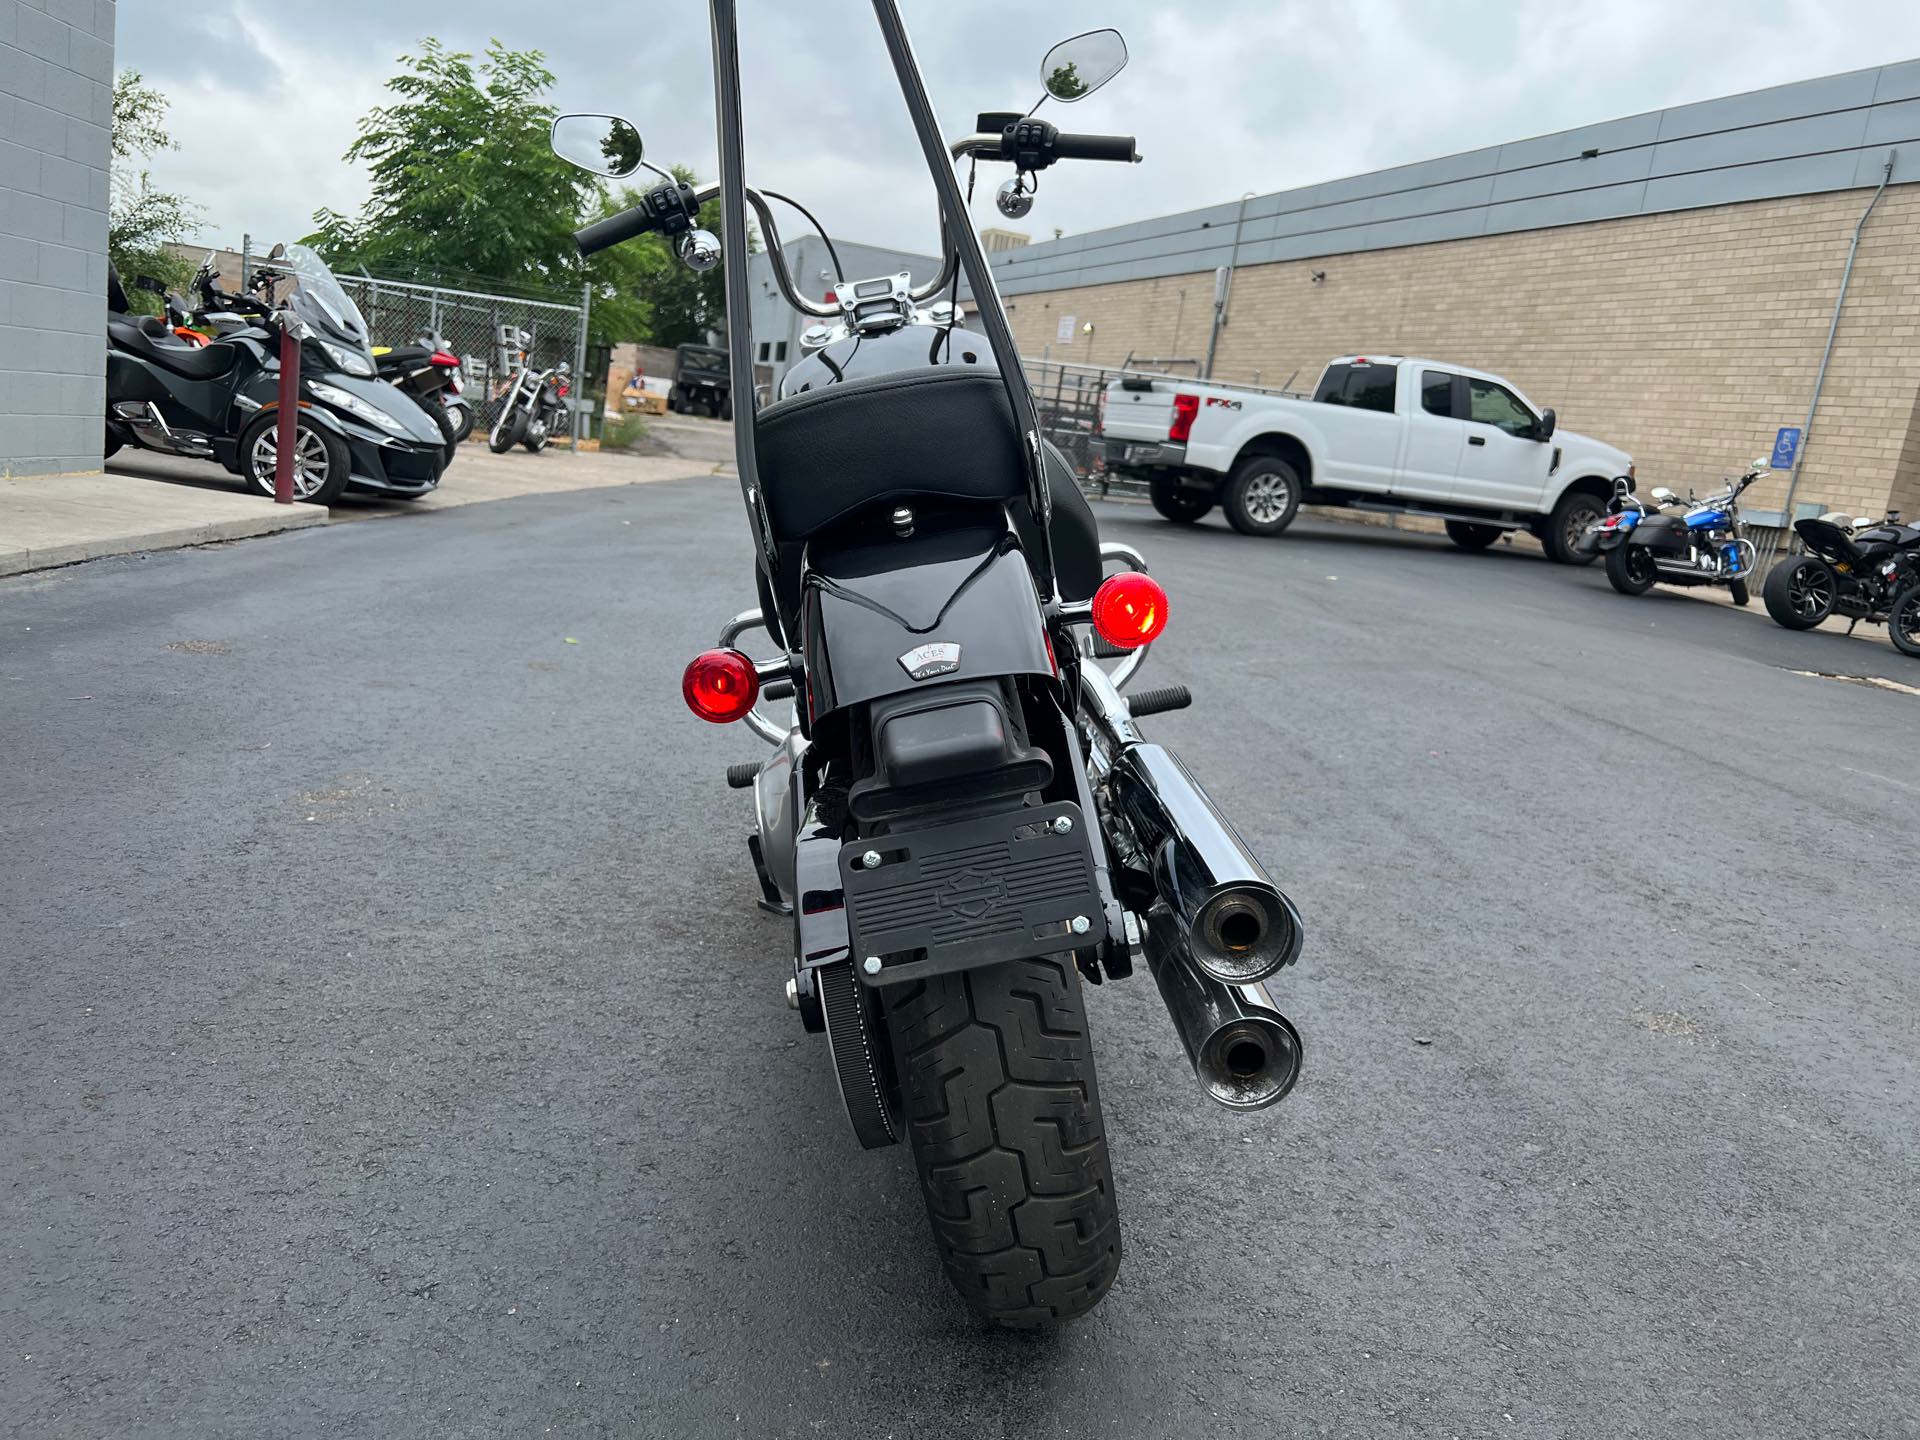 2021 Harley-Davidson Softail Standard Softail Standard at Aces Motorcycles - Fort Collins